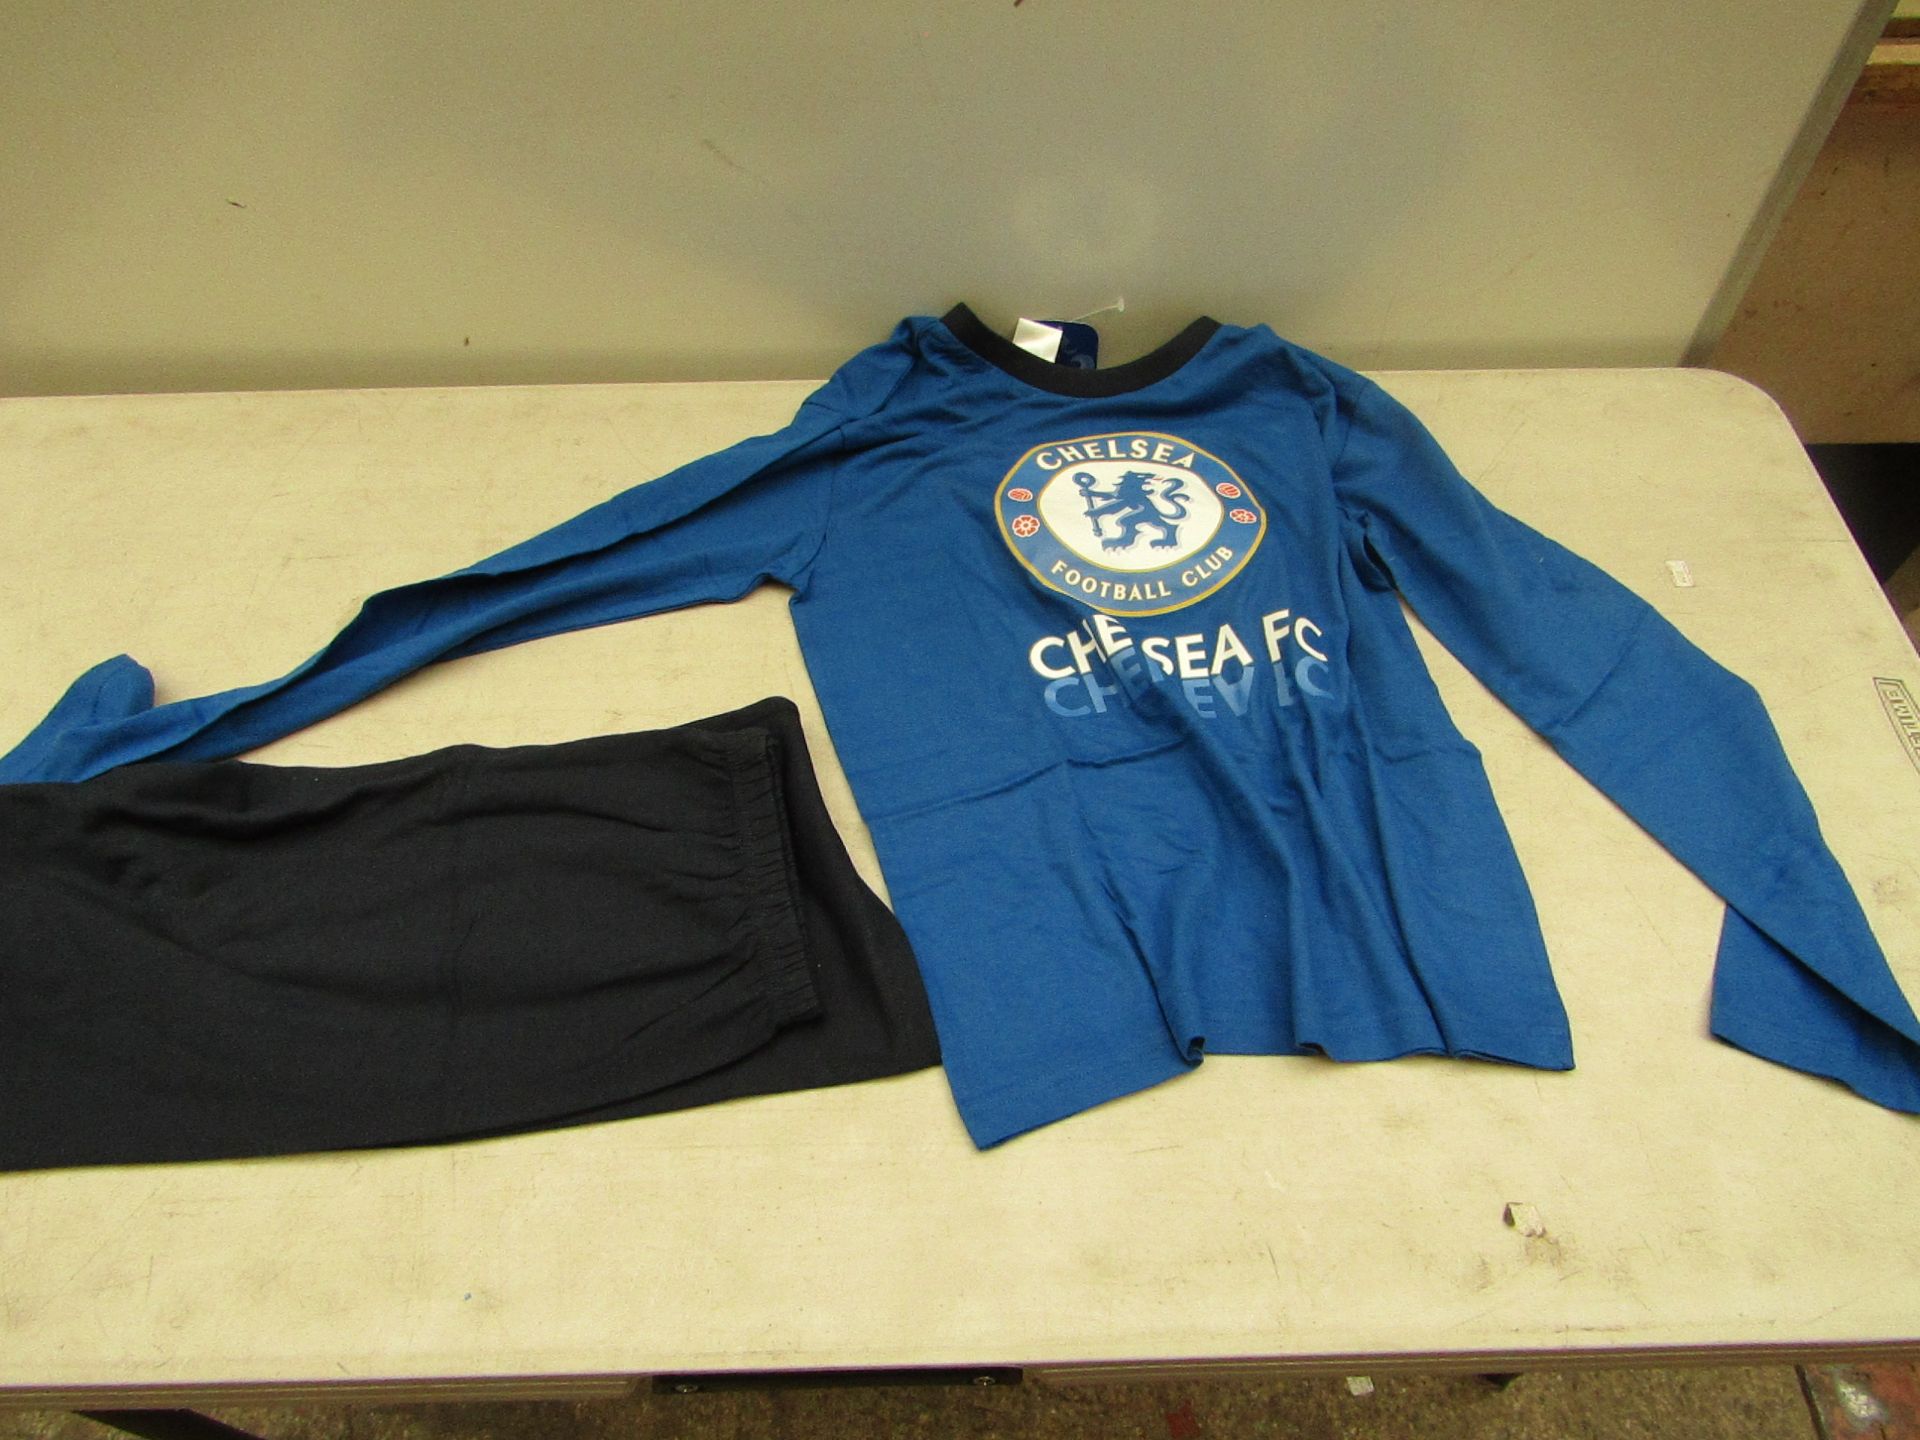 Chelsea Football Club children's pyjamas, 11-12yrs, new and packaged.